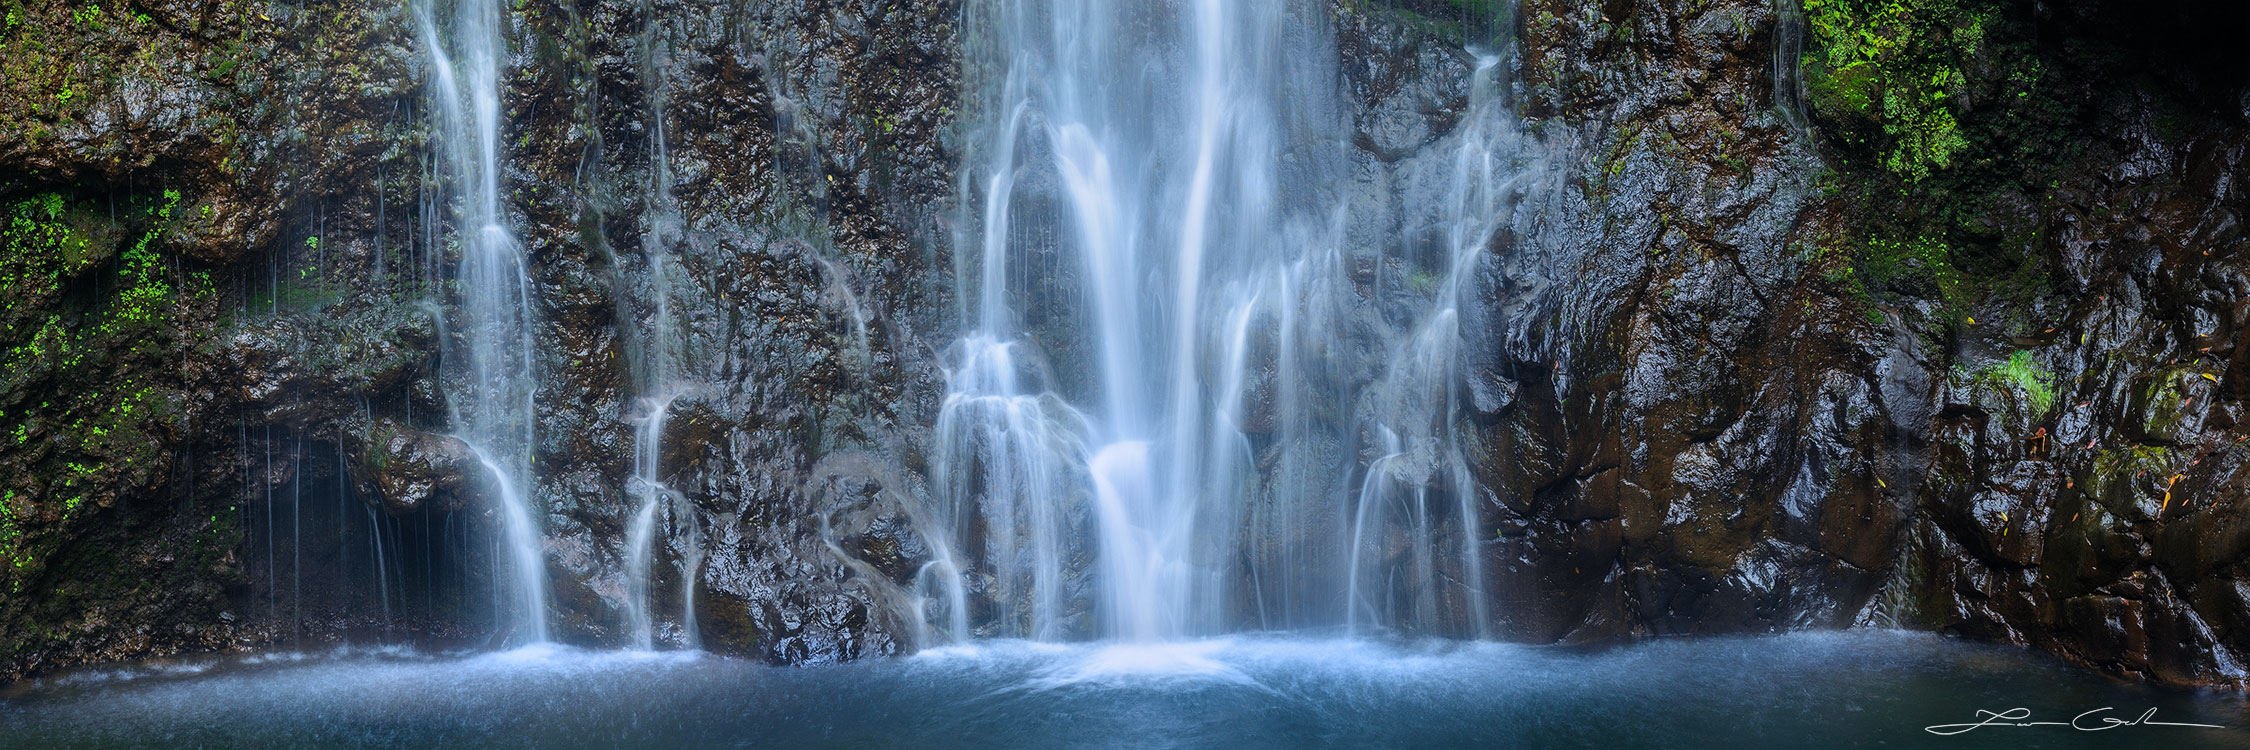 Panoramic waterfall in Hawaii, 'Water Silk' fine art print showing silky water cascading down a dark rock face with moss and small plants, ending in a splash at the pool below - Gintchin Fine Art.